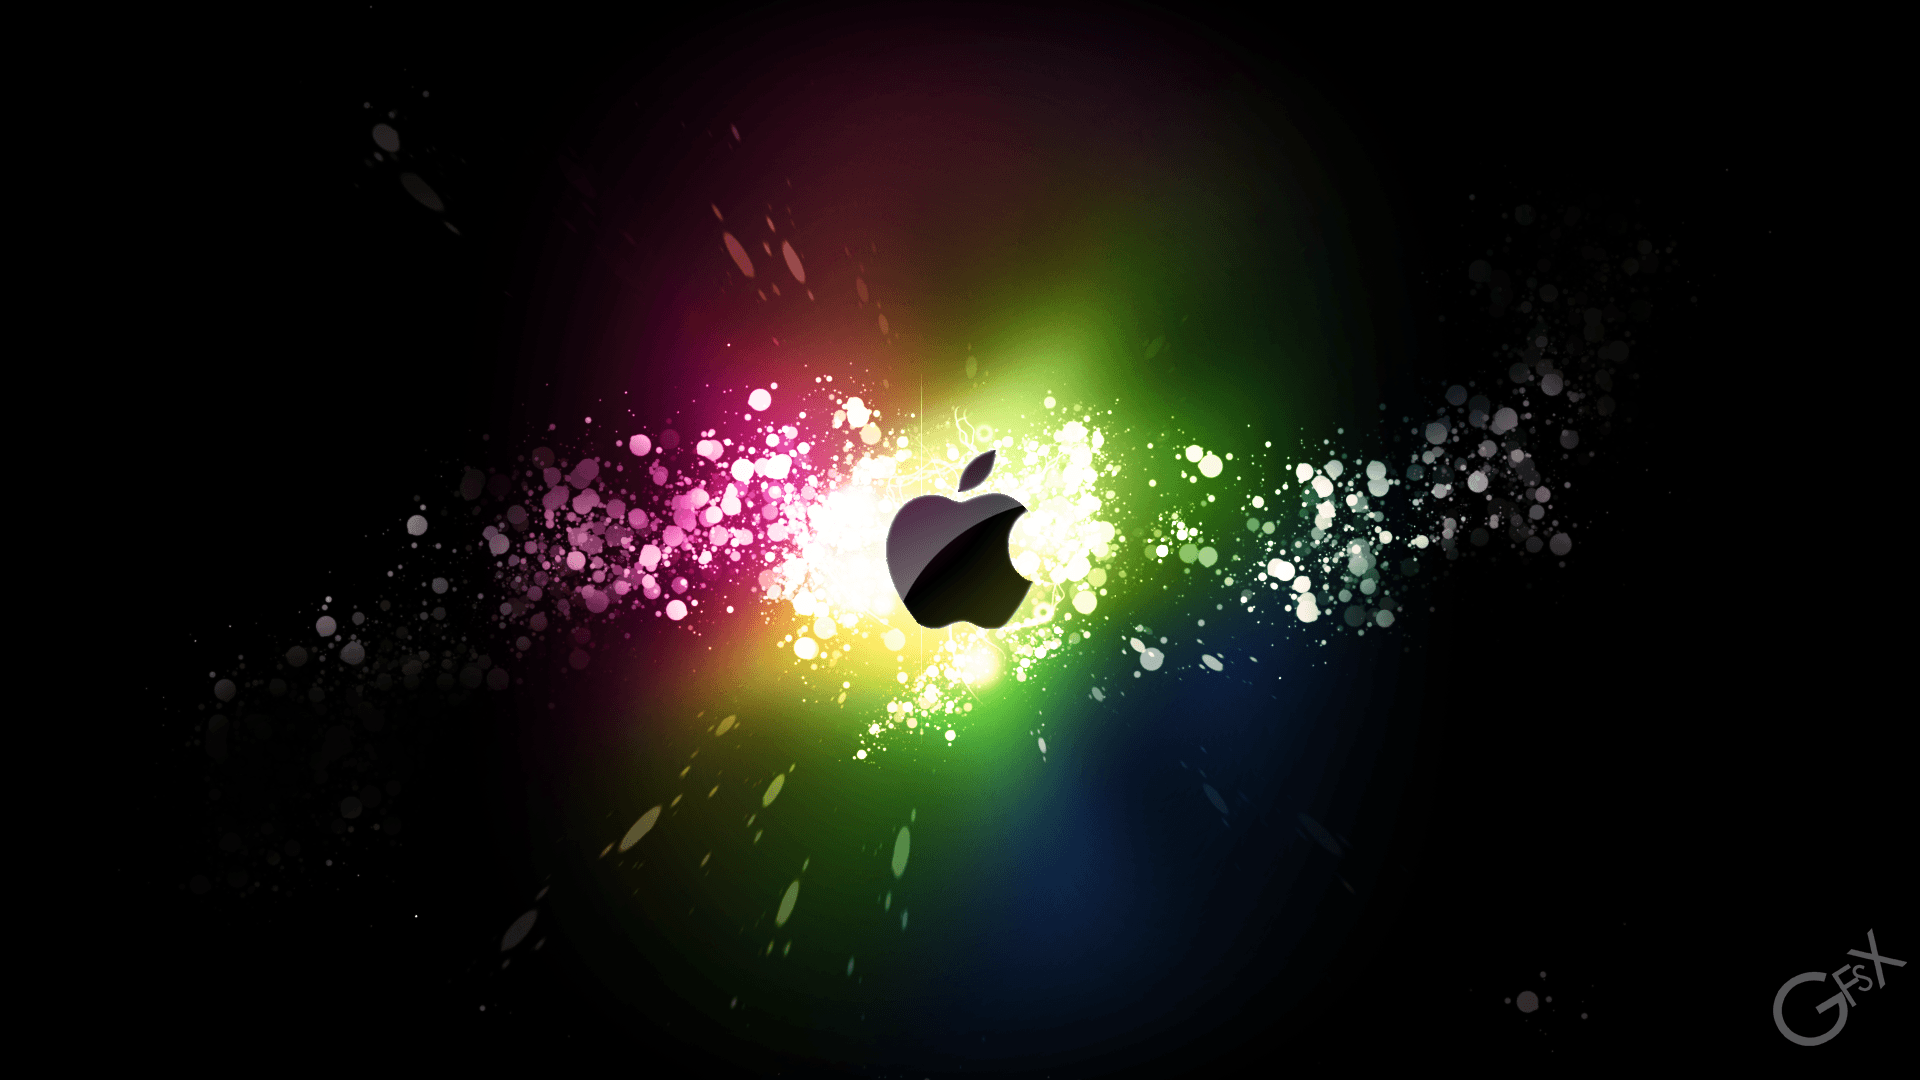 Apple Backgrounds For Mac - Wallpaper Cave